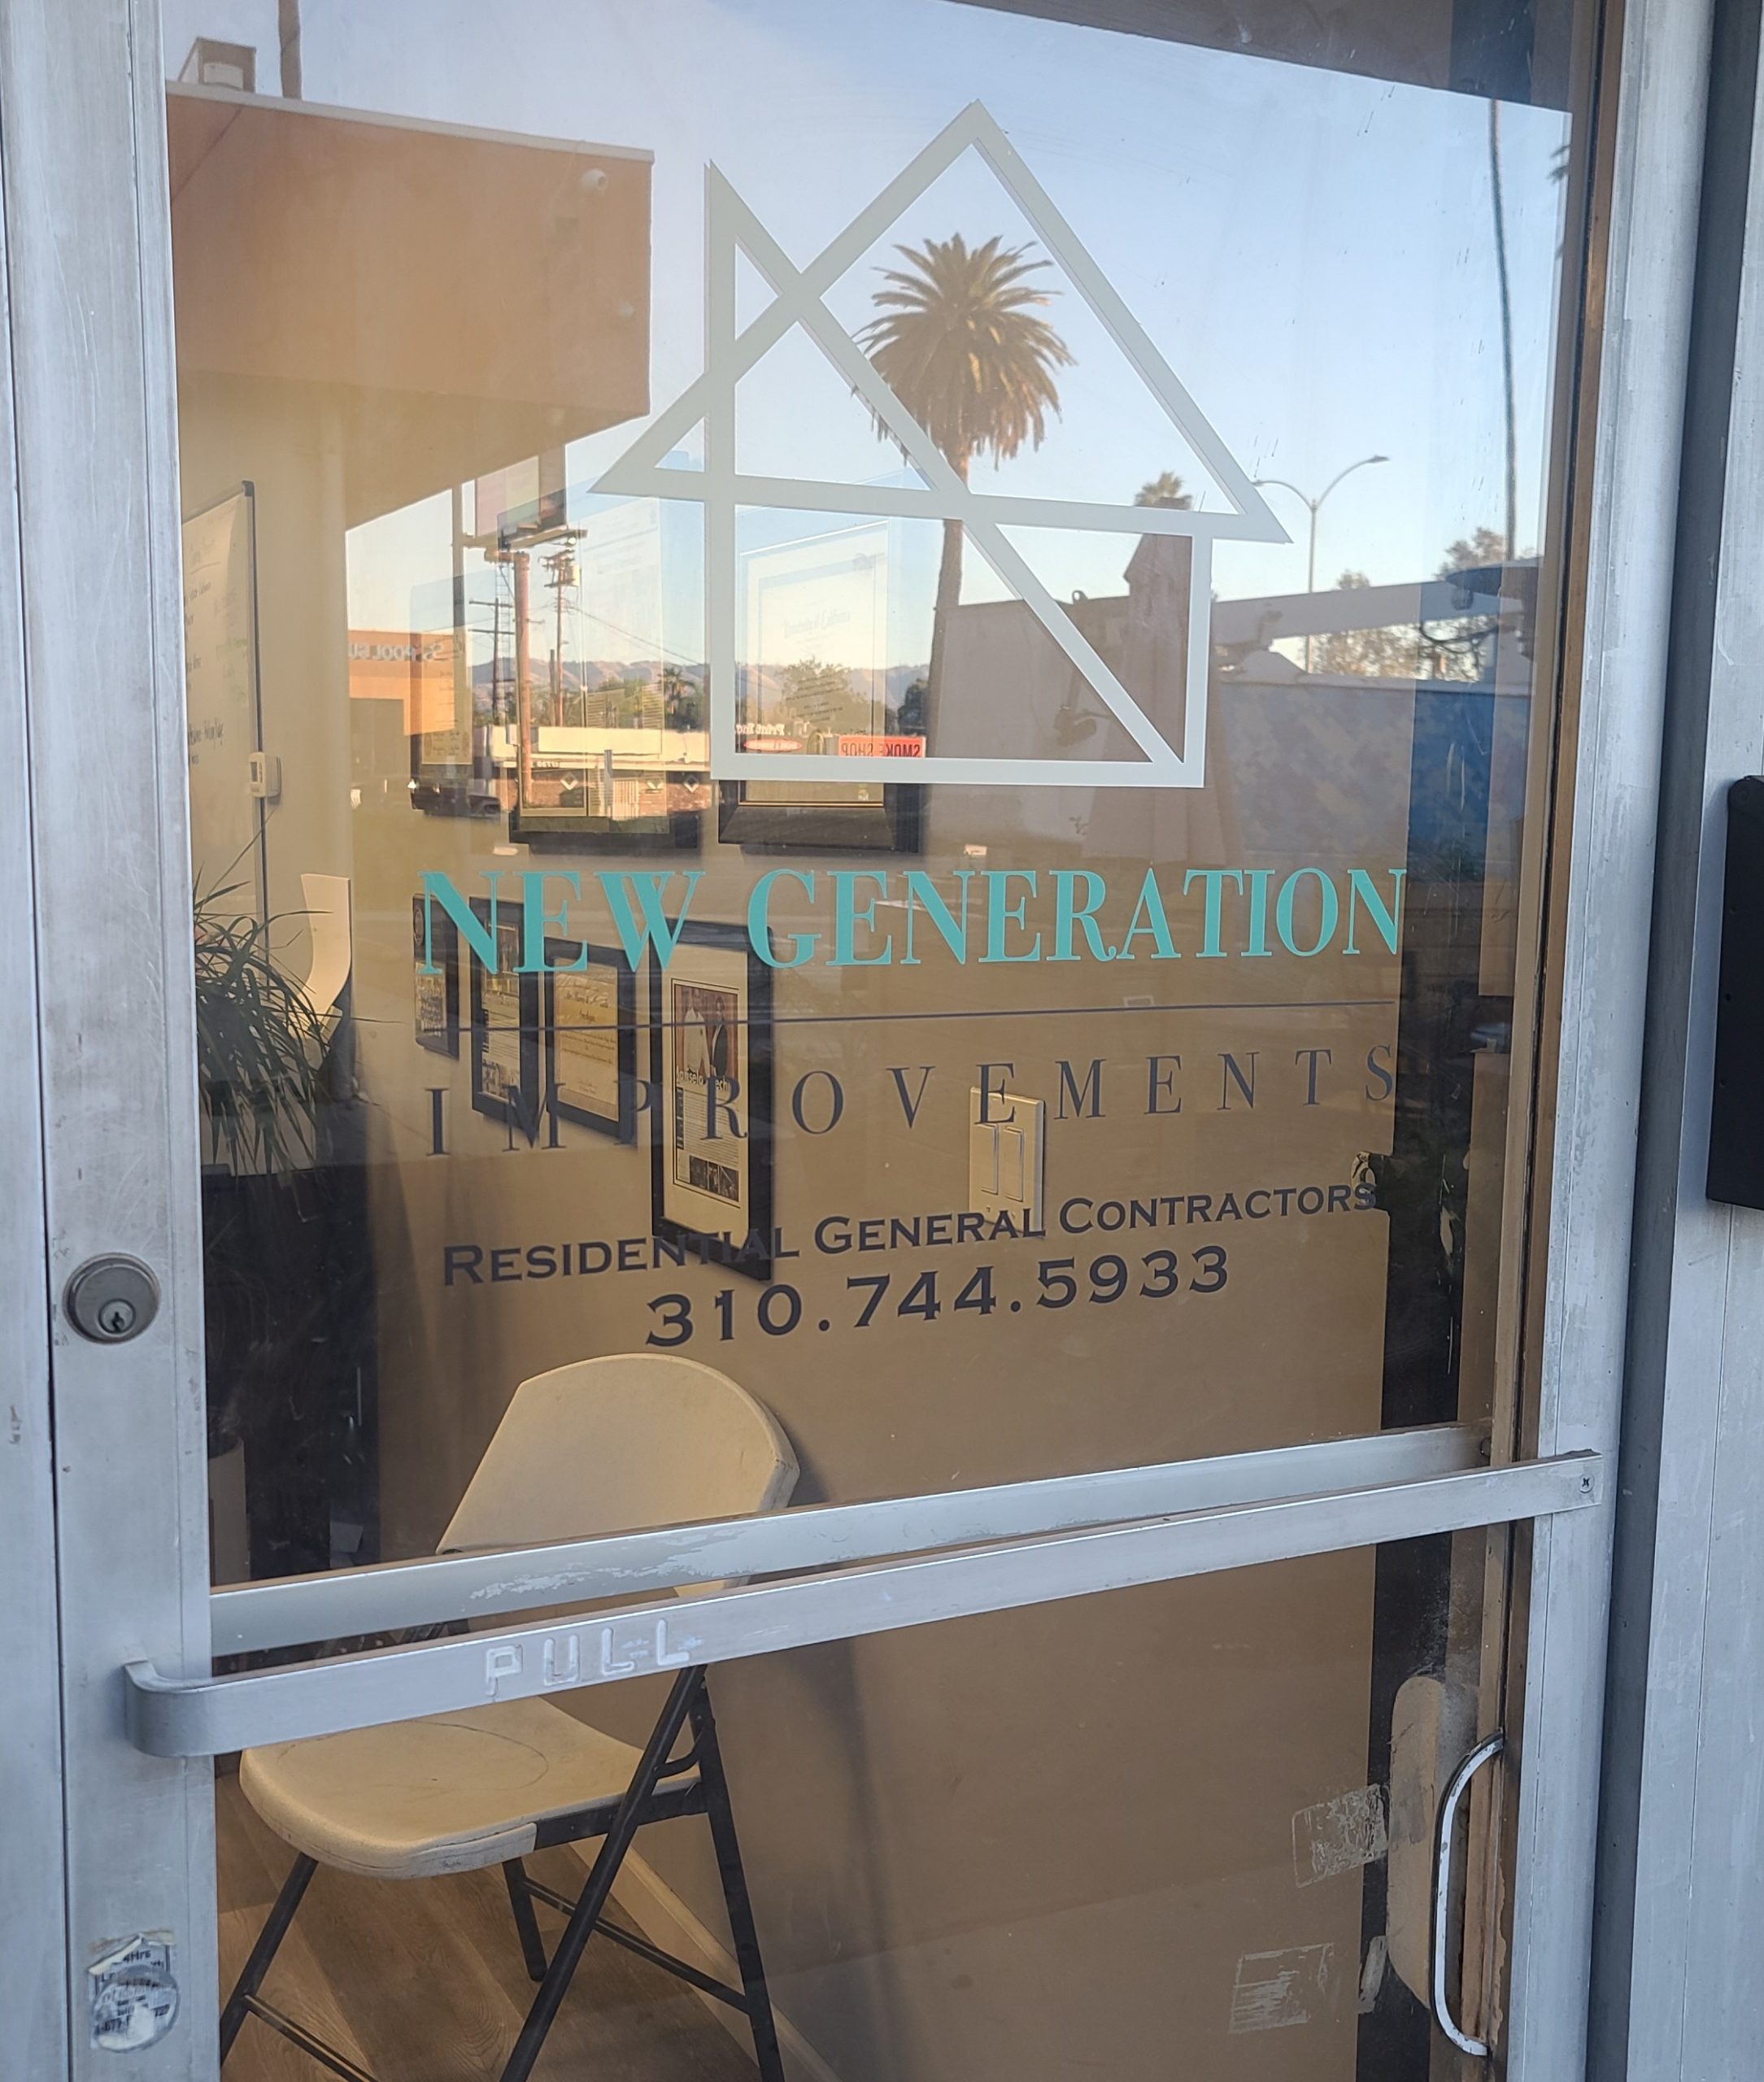 The storefront signs for New Generation Improvements for their Reseda office include glass door graphics that show their company logo and their contact details.